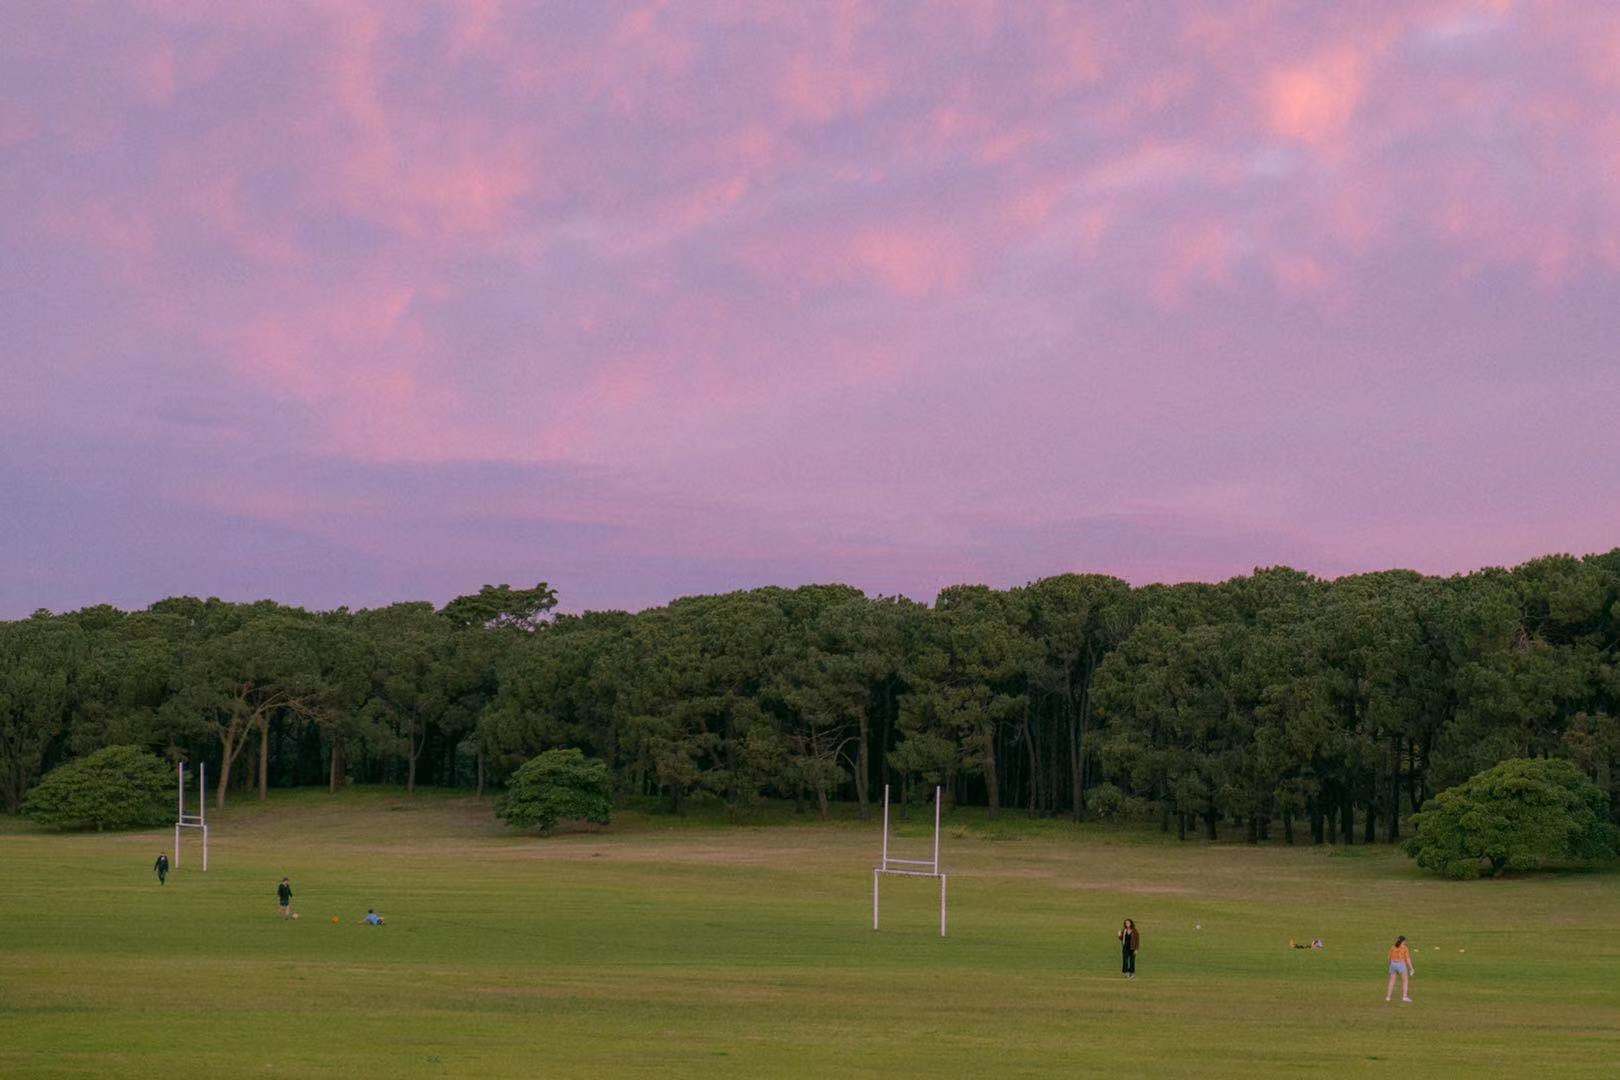 a far view of a purple and pink sunset in a green field